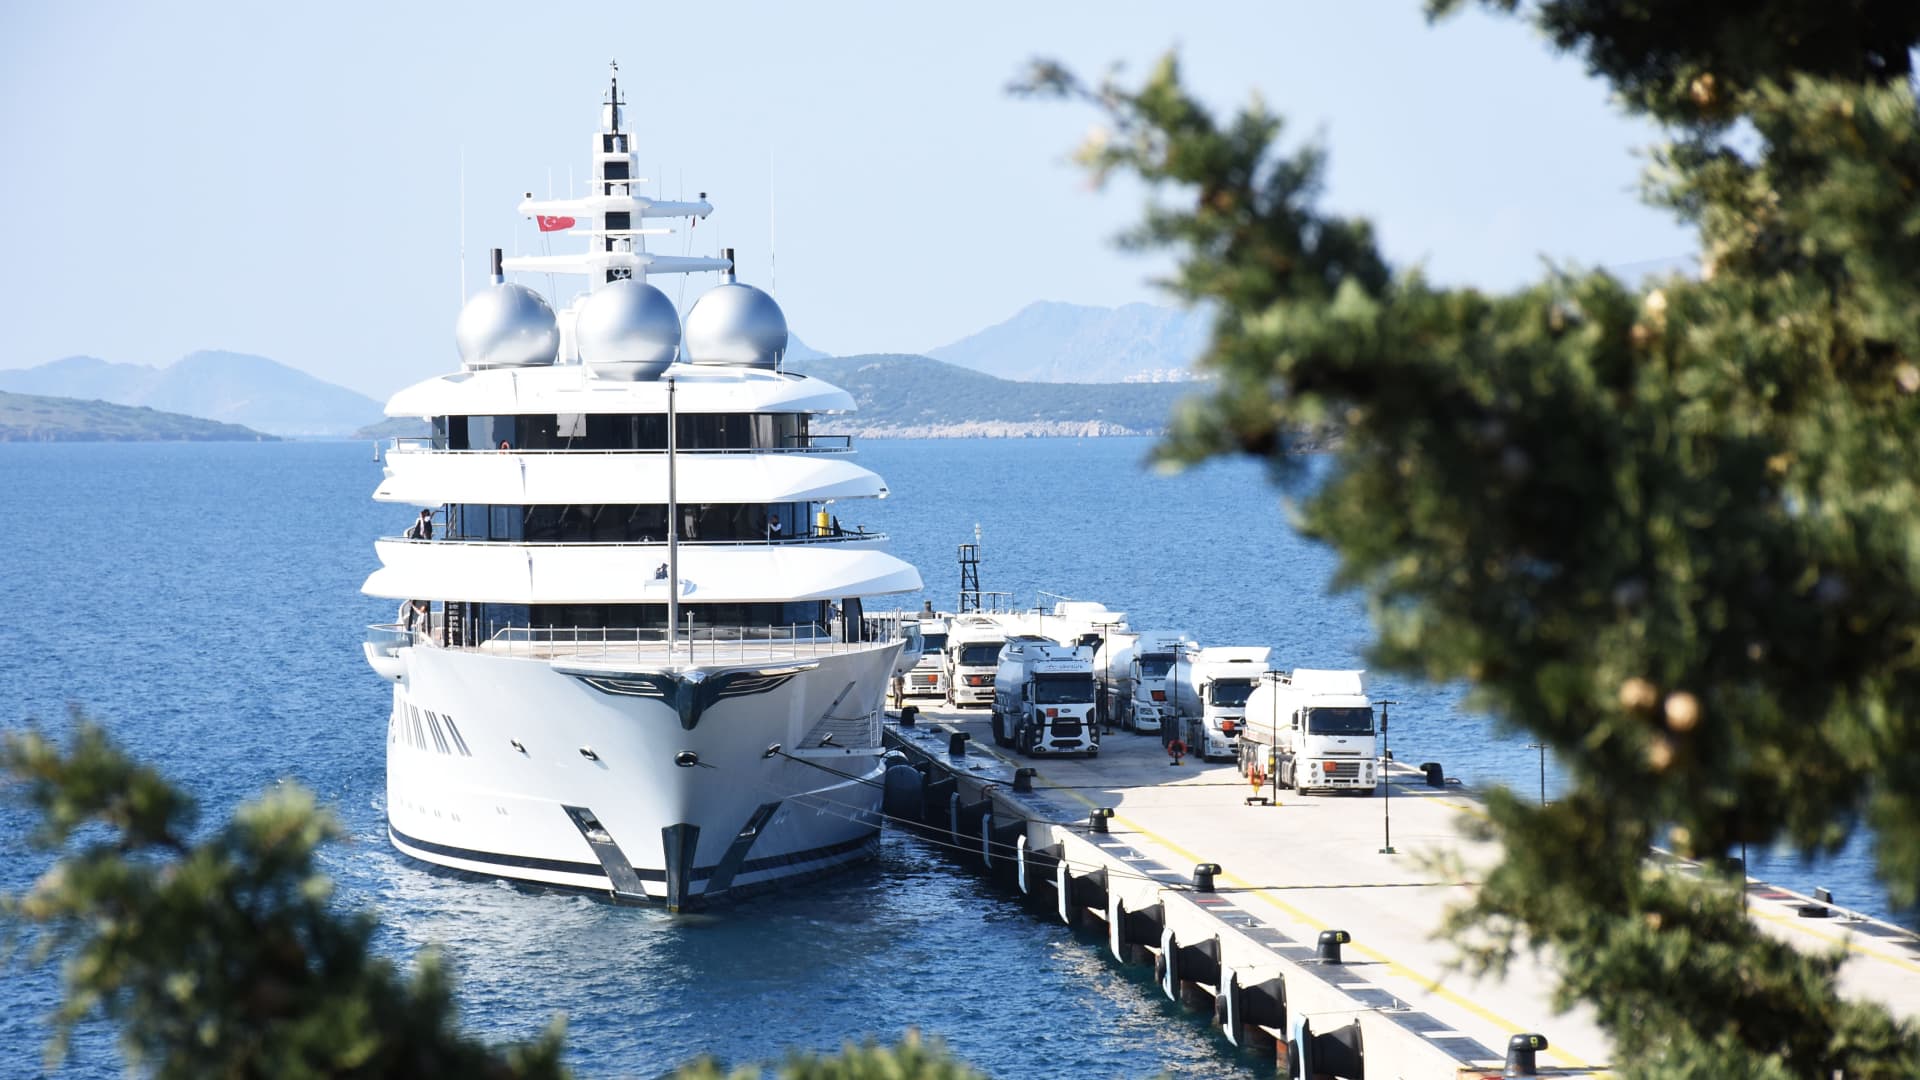 The 106m-long and 18m-high super luxury motor yacht Amadea, one of the largest yacht in the world is seen after anchored at pier in Pasatarlasi for bunkering with 9 fuel trucks, on February 18, 2020 in Bodrum district of Mugla province in Turkey.